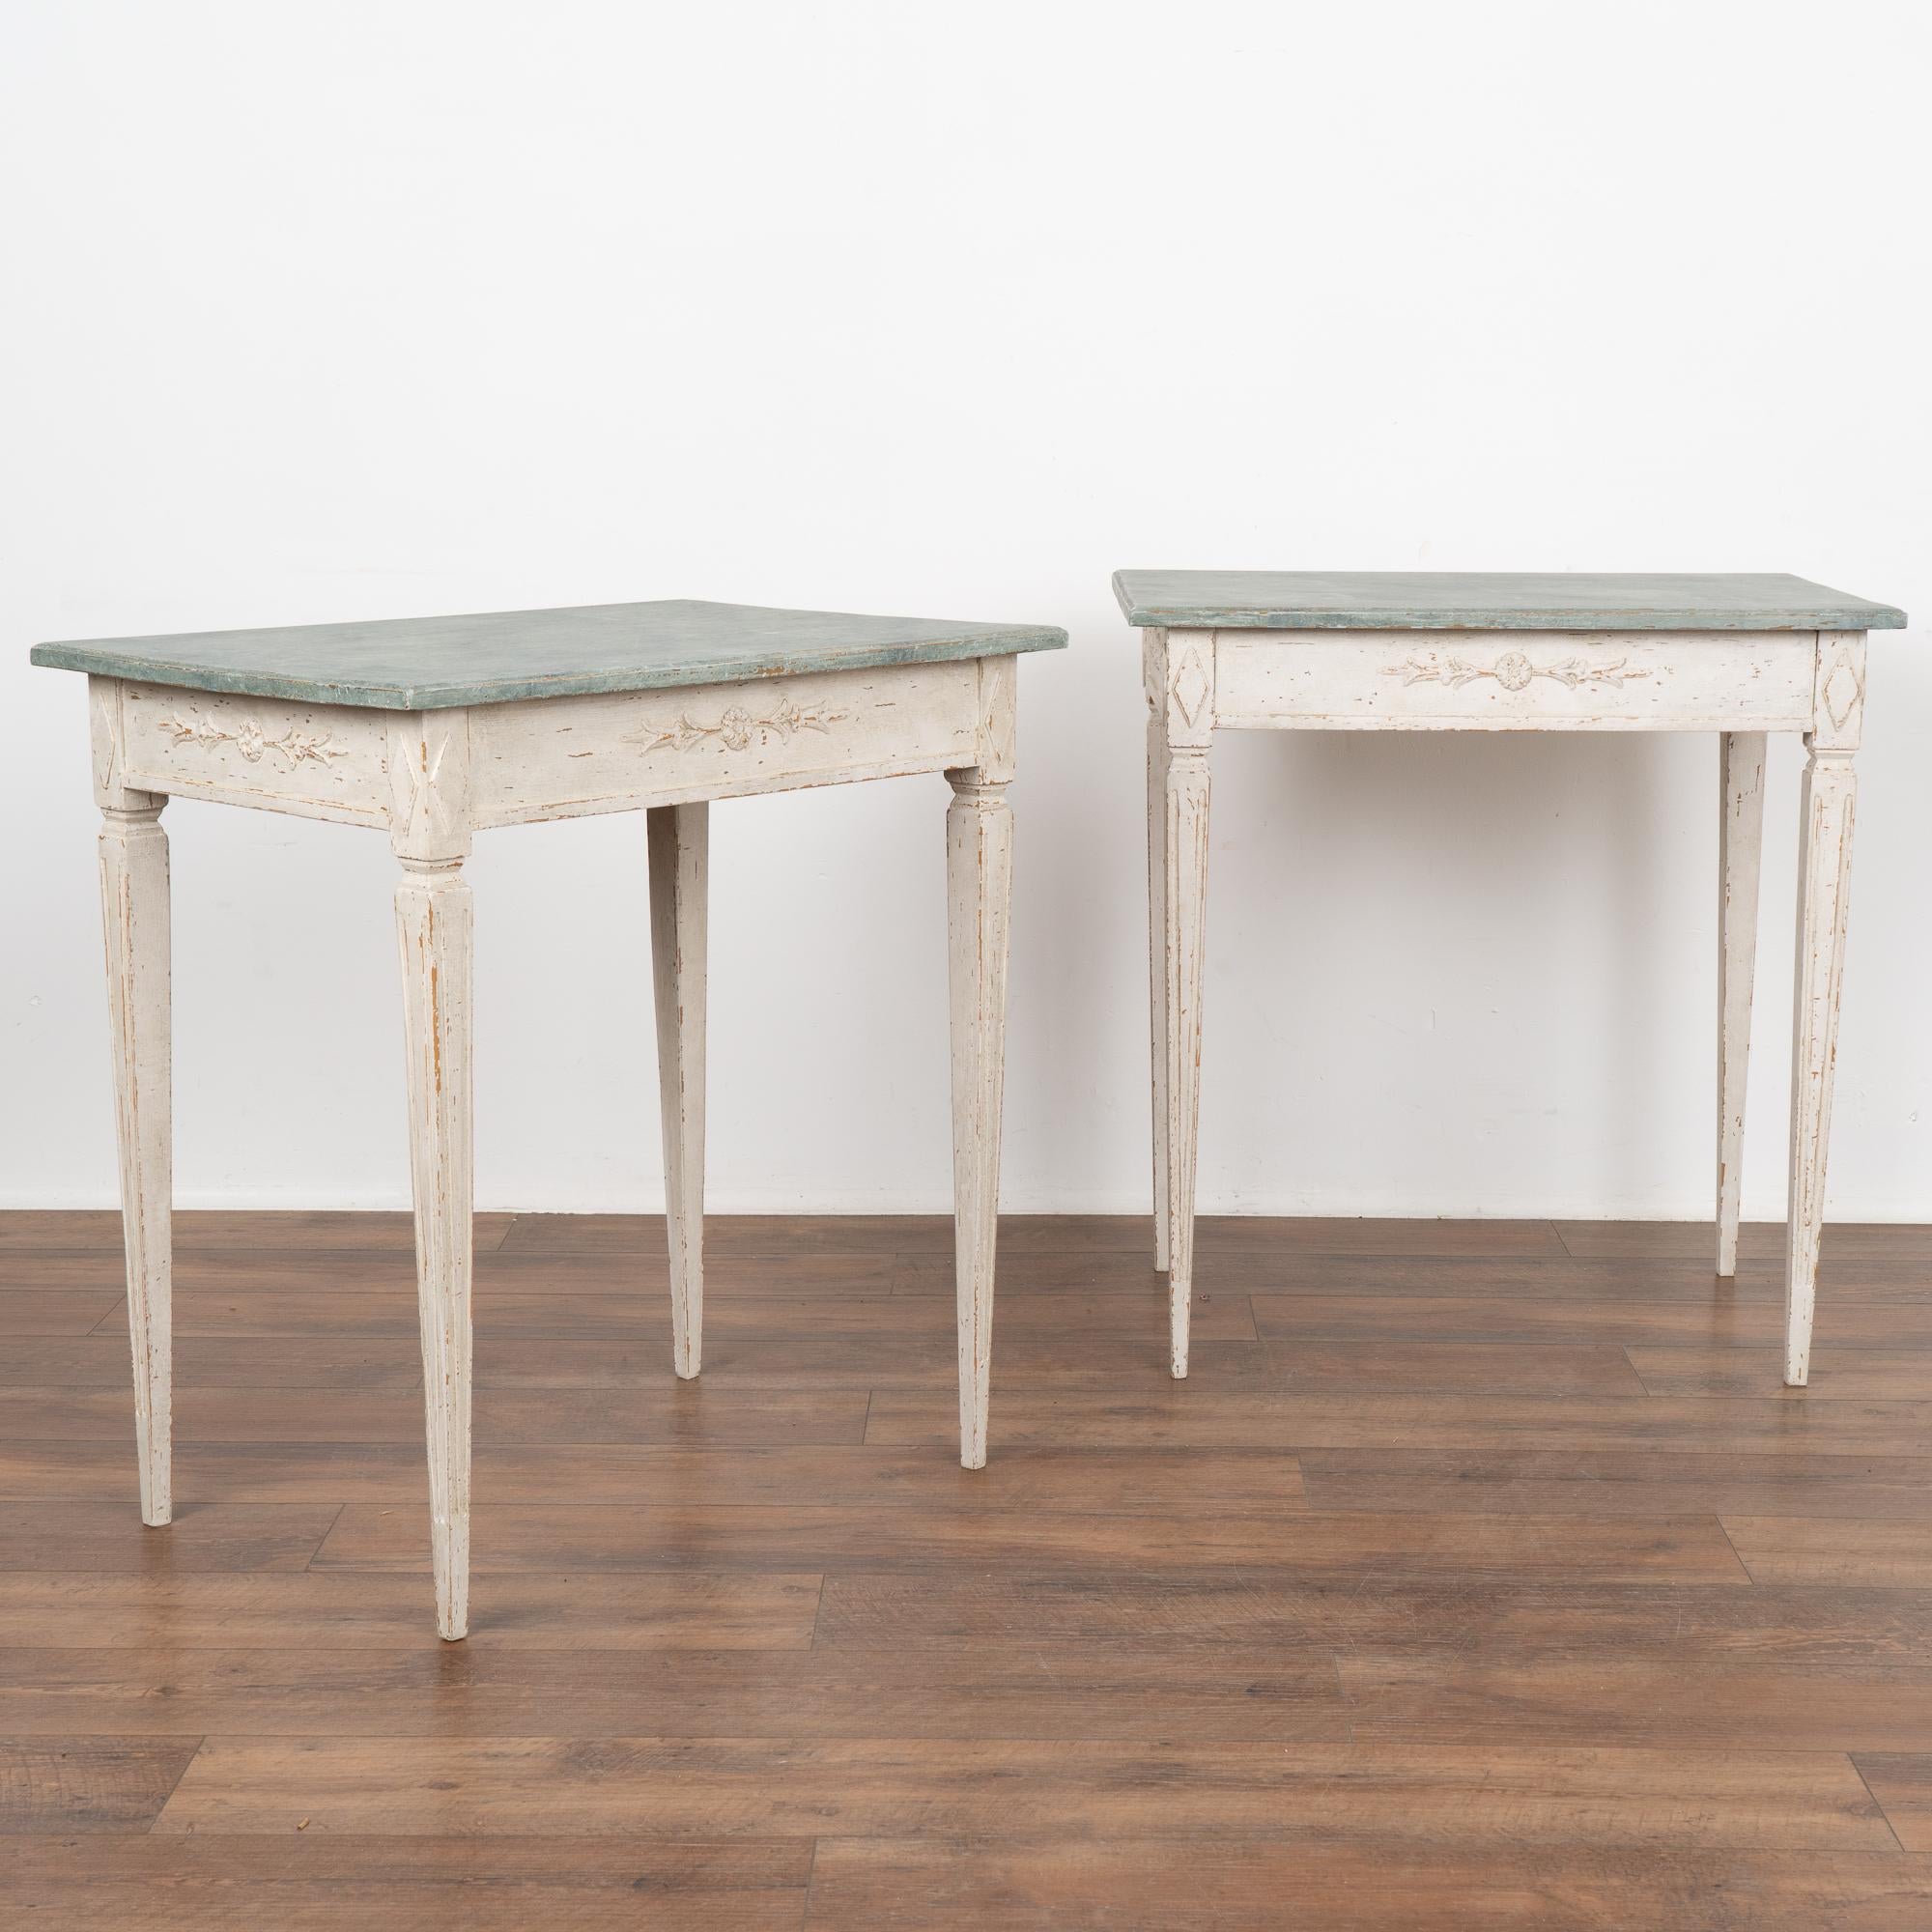 Pair, Gustavian side tables with slender tapered fluted legs and delicate carving along skirt. 
Restored, later professionally painted in layered shades of white and lightly distressed to fit the age and grace of this lovely table. Top is painted in